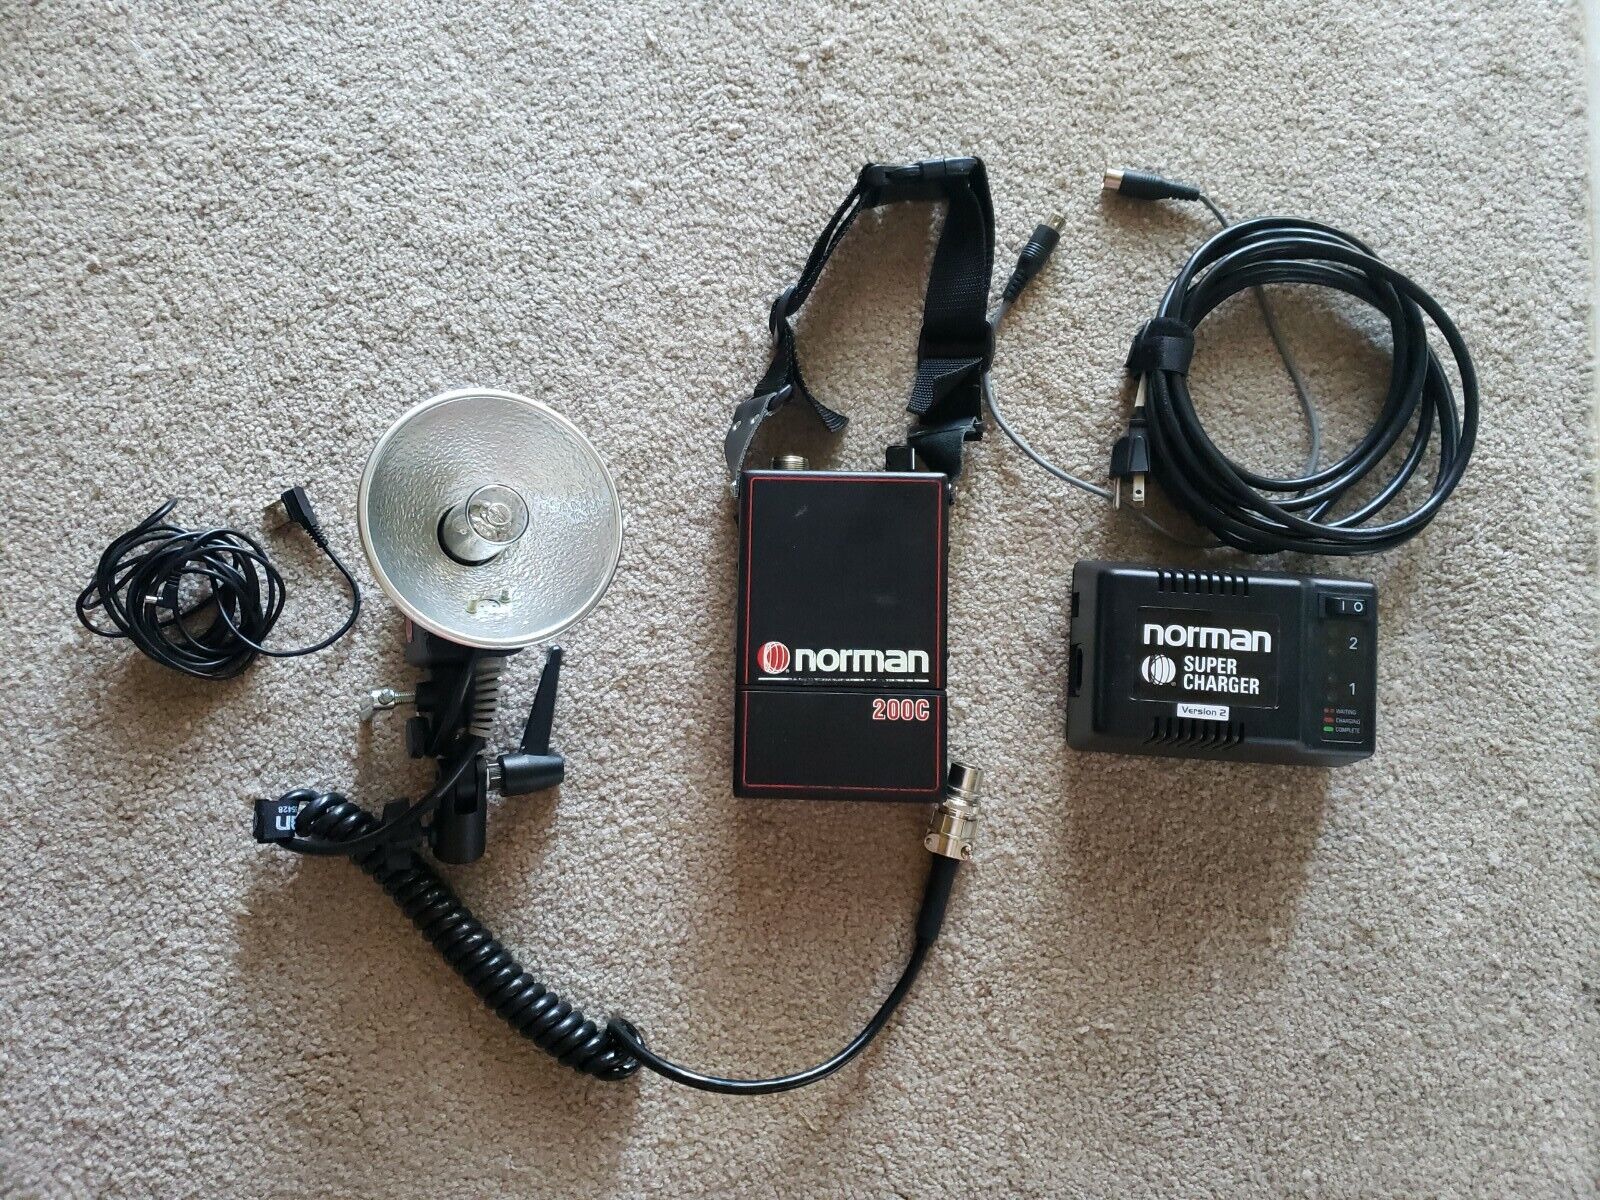 Norman 200 lighting Kit w/200C Battery, Super Charger, all cables. Works!